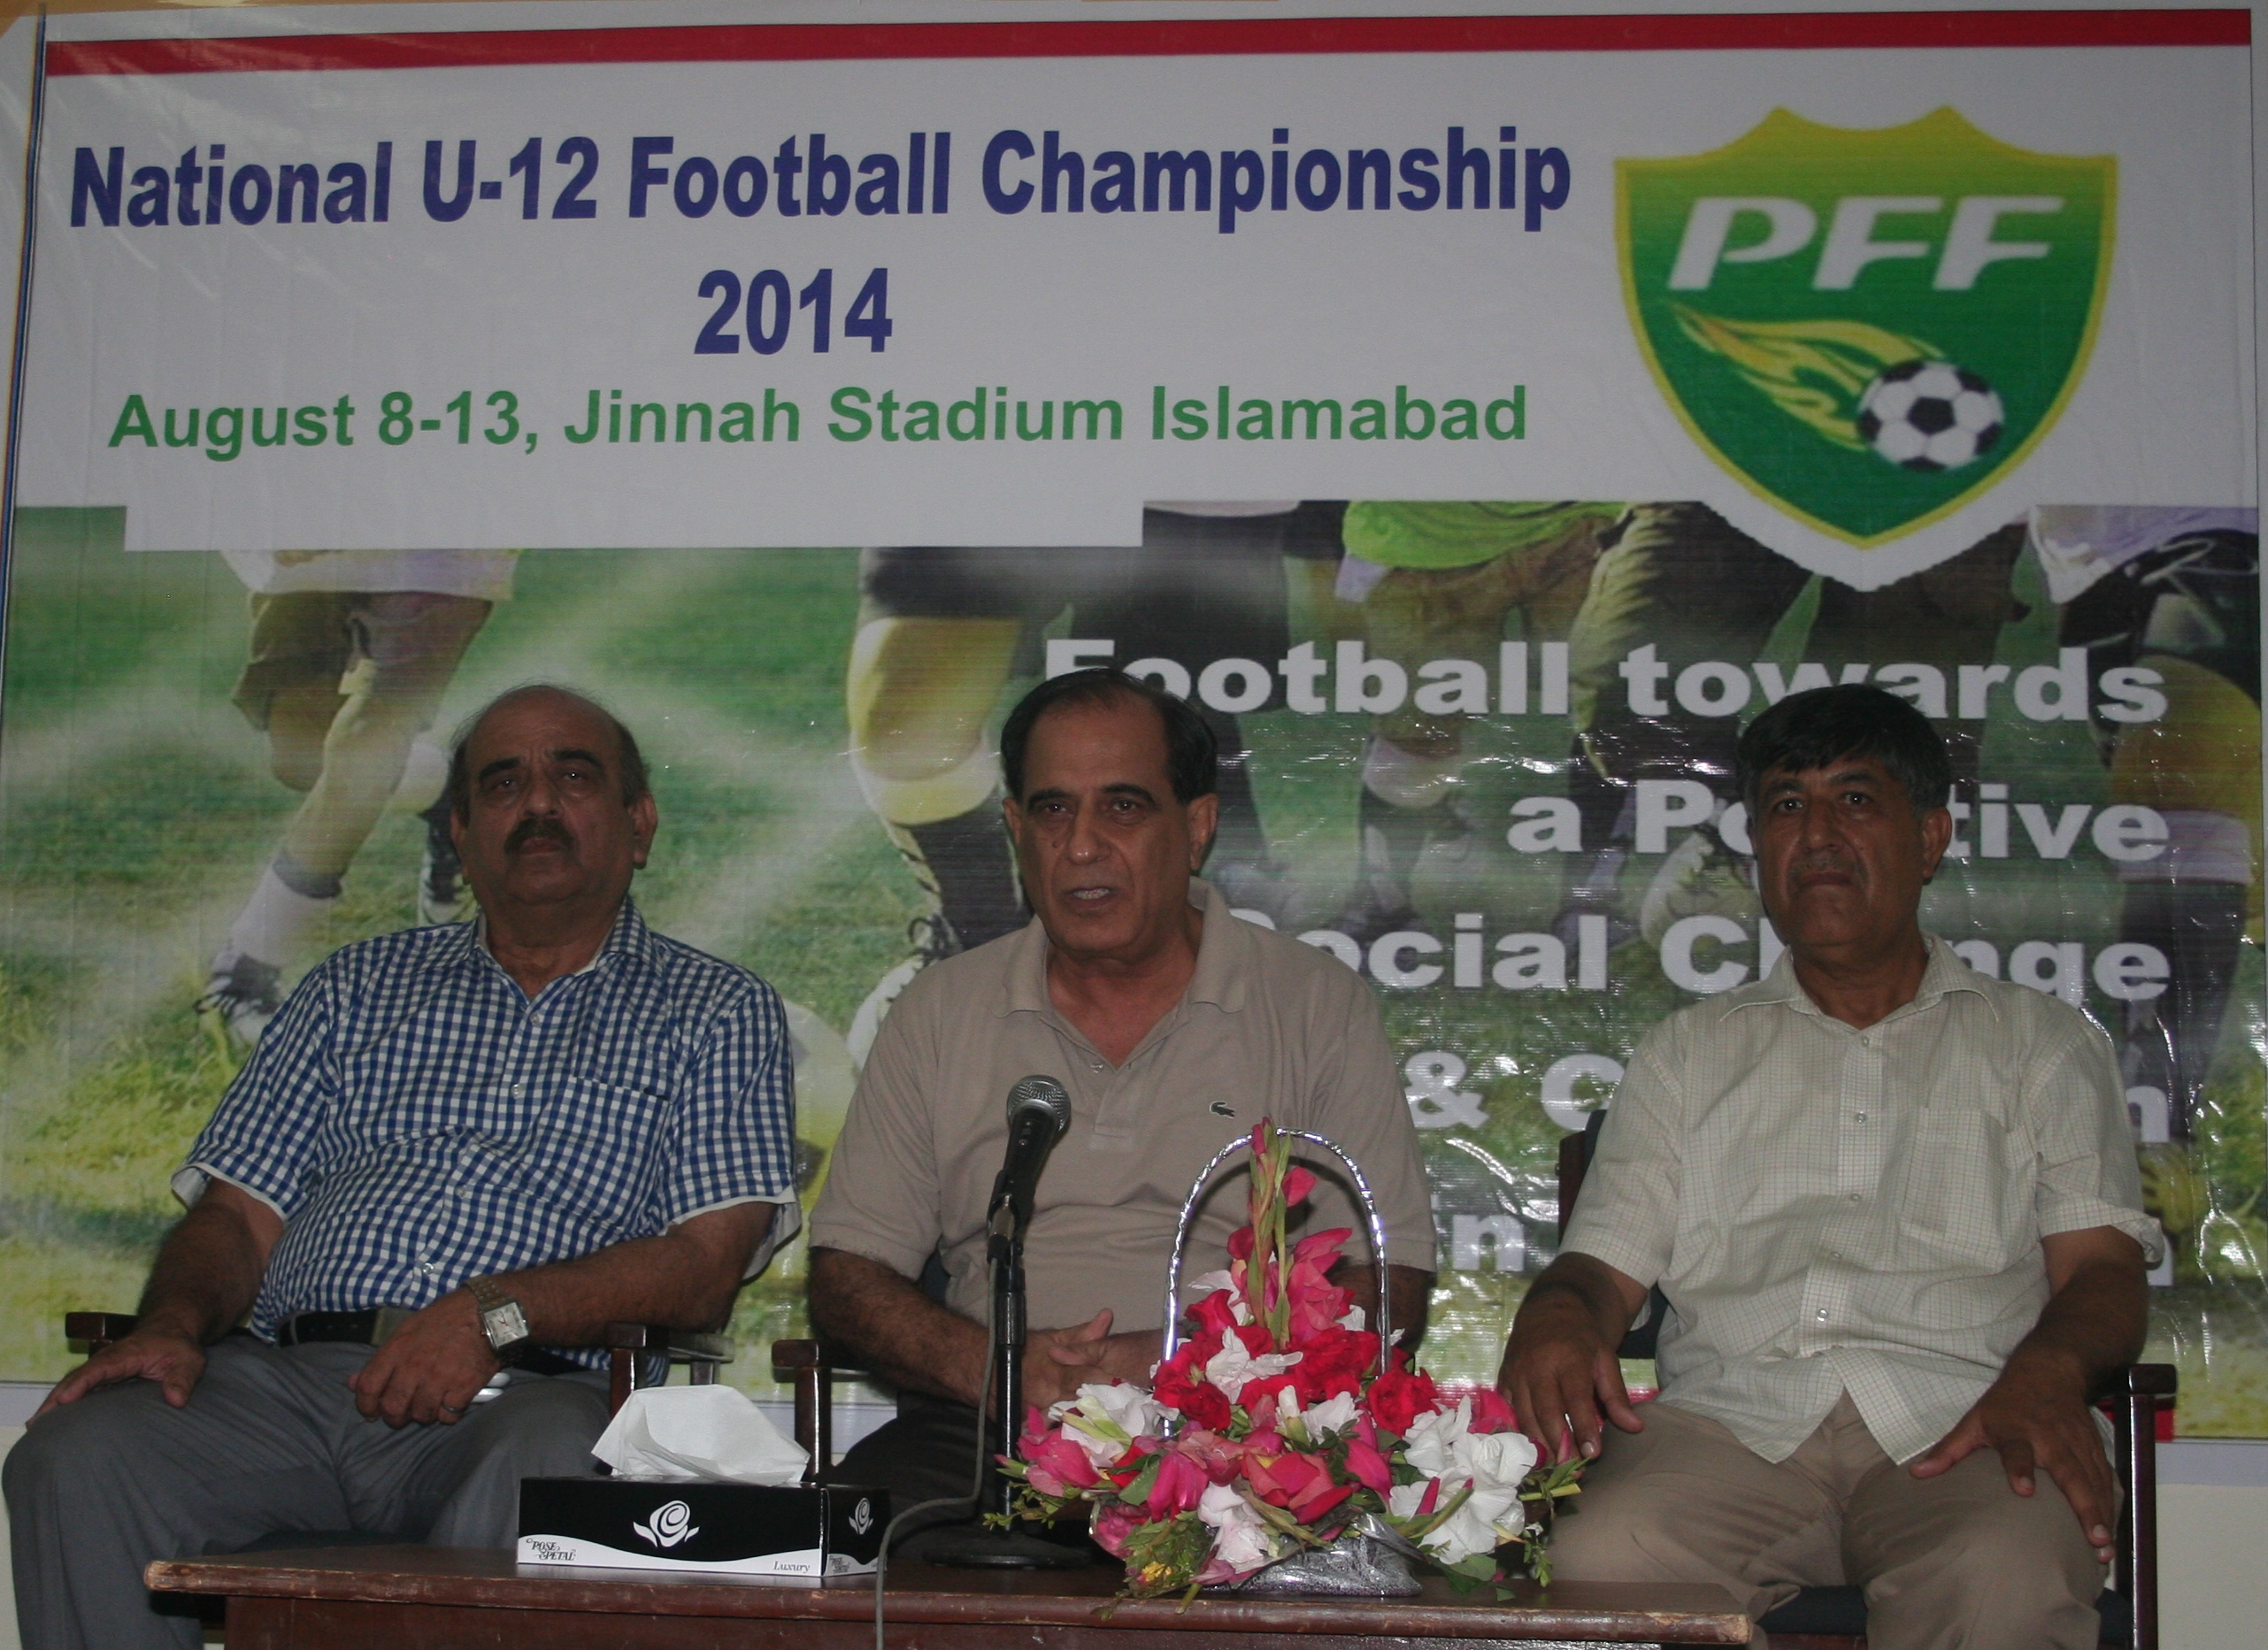 U-12 Championship set to start from today in Islamabad